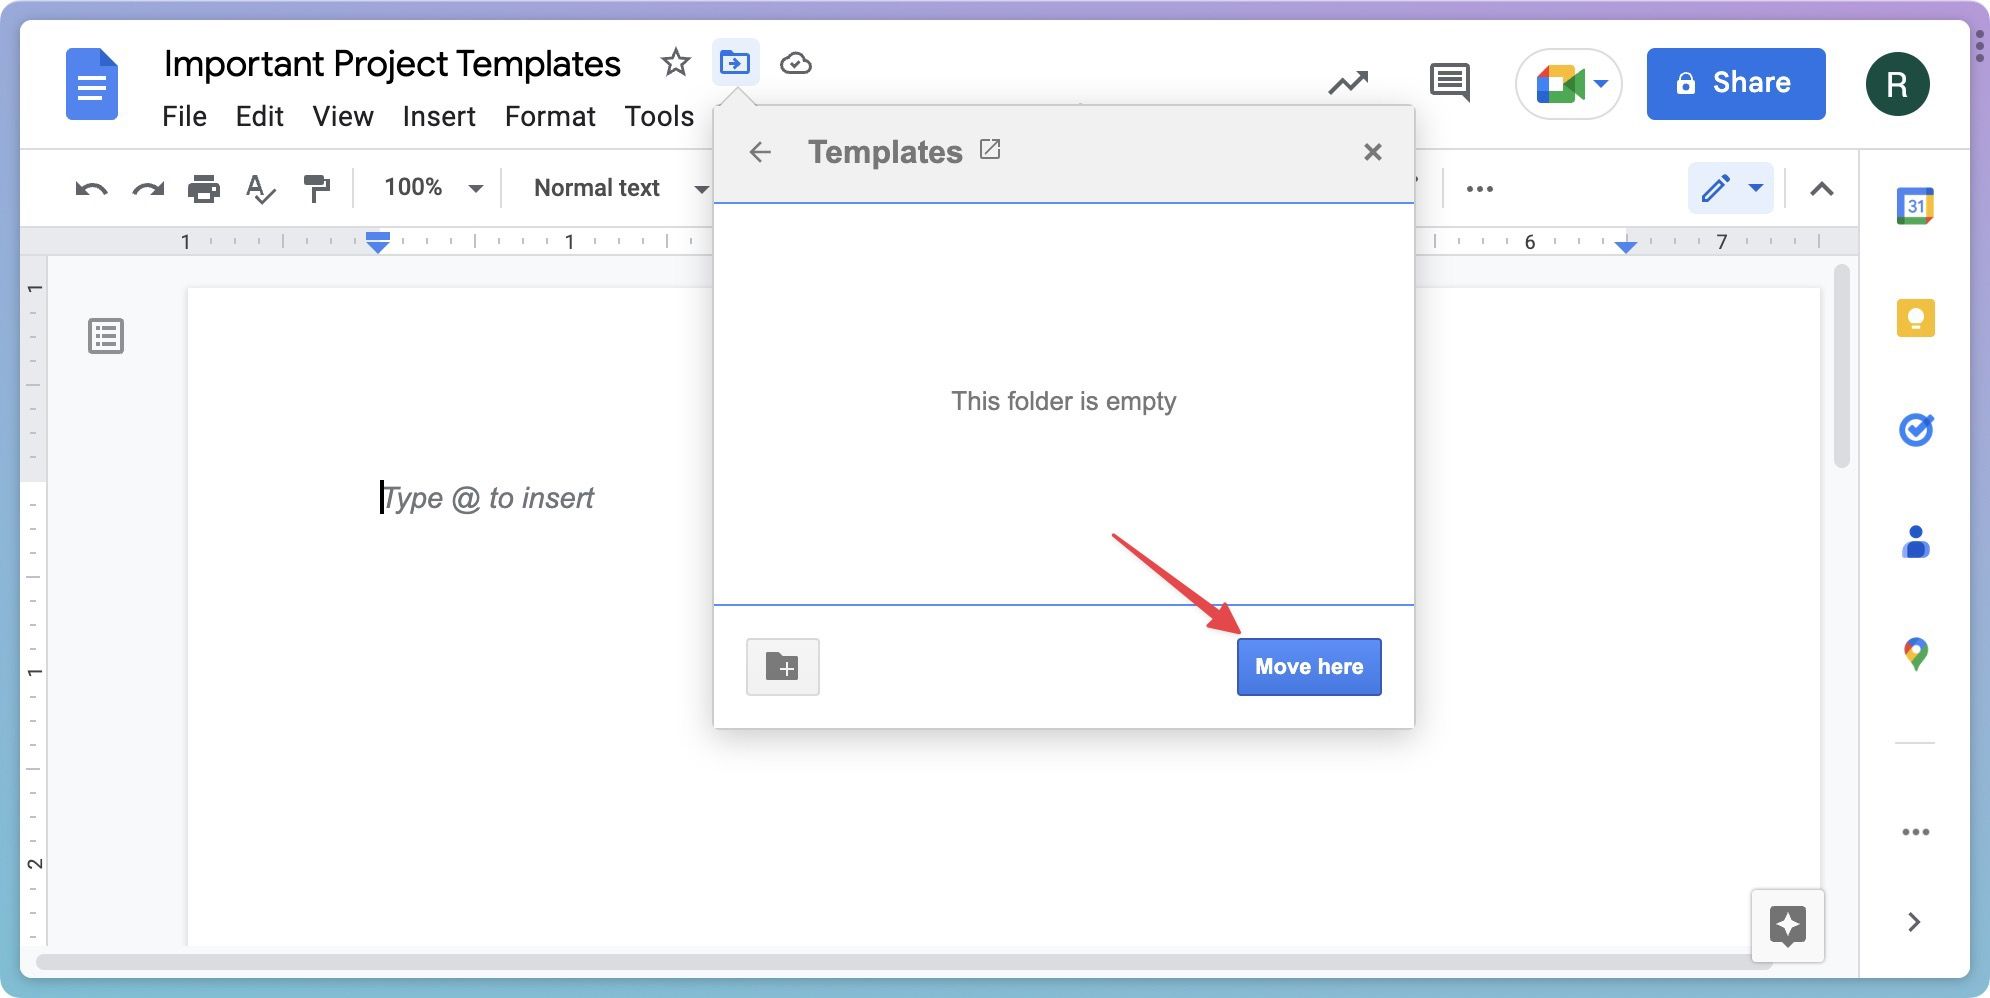 Google Docs screenshot showing how to move a document to a folder